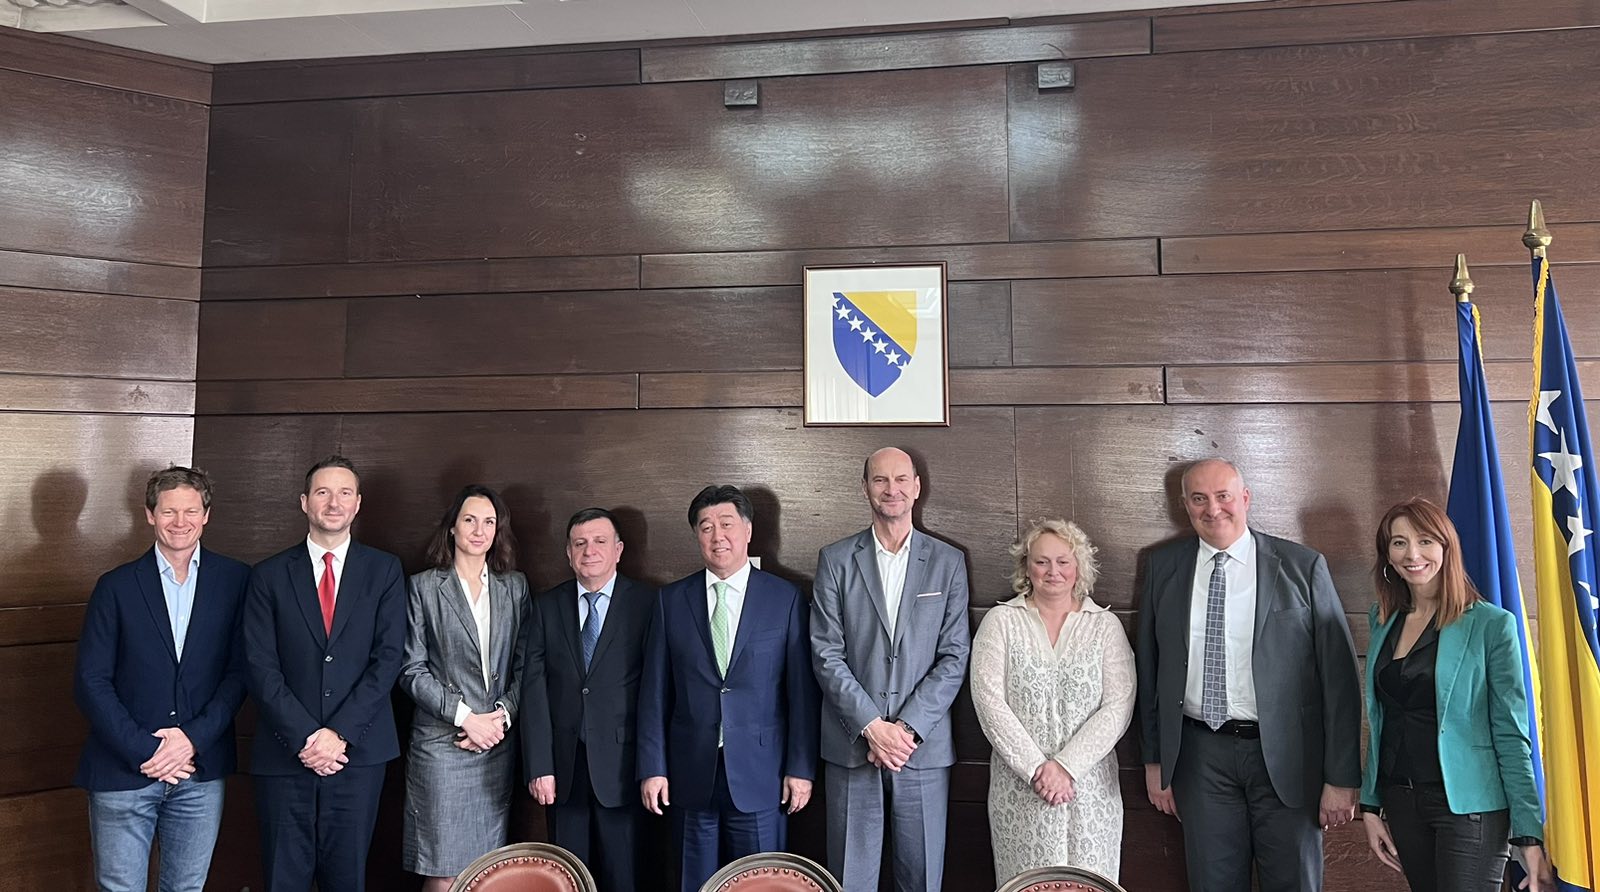 ACSH delegation met with Government of the Federation of Bosnia and Herzegovina